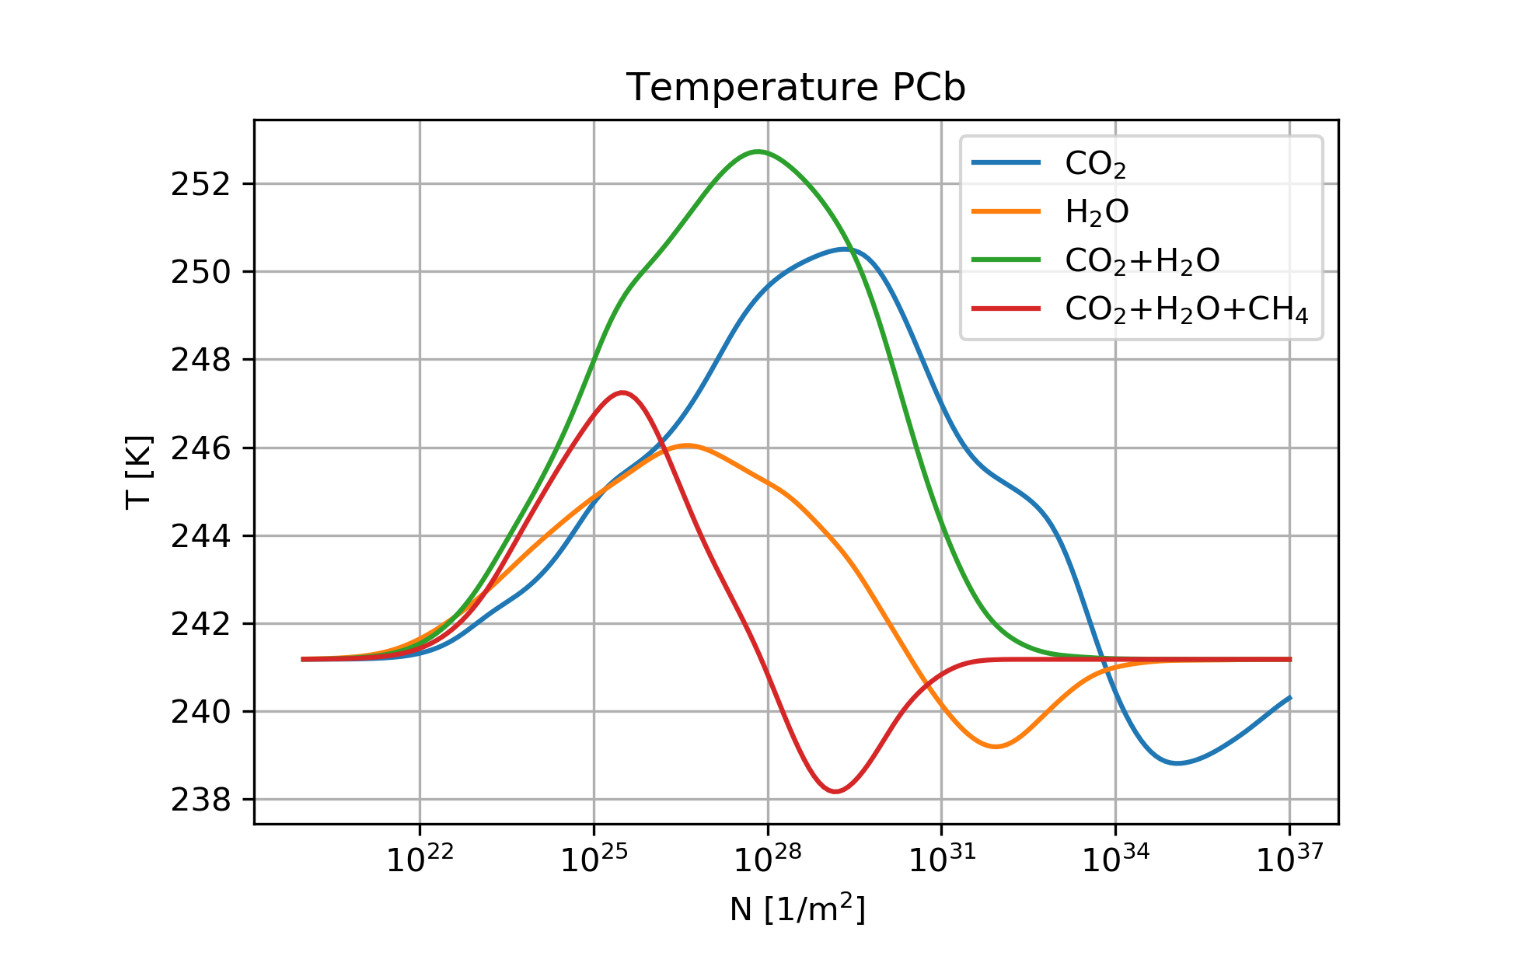 The greenhouse factors dependence on temperature and atmospheric composition.